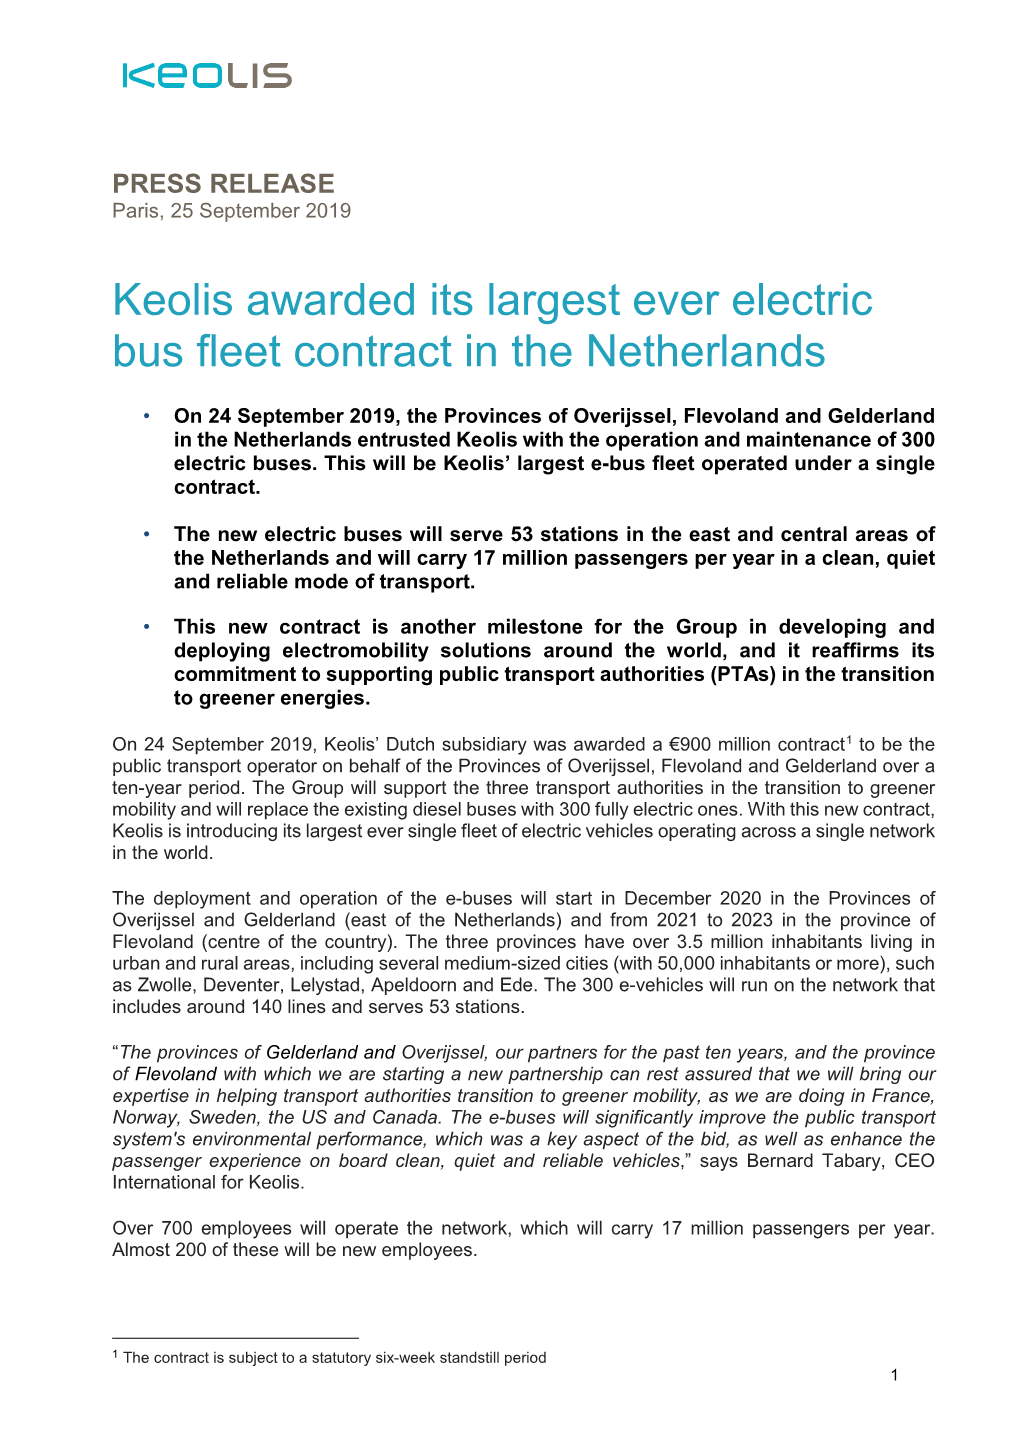 Keolis Awarded Its Largest Ever Electric Bus Fleet Contract in the Netherlands